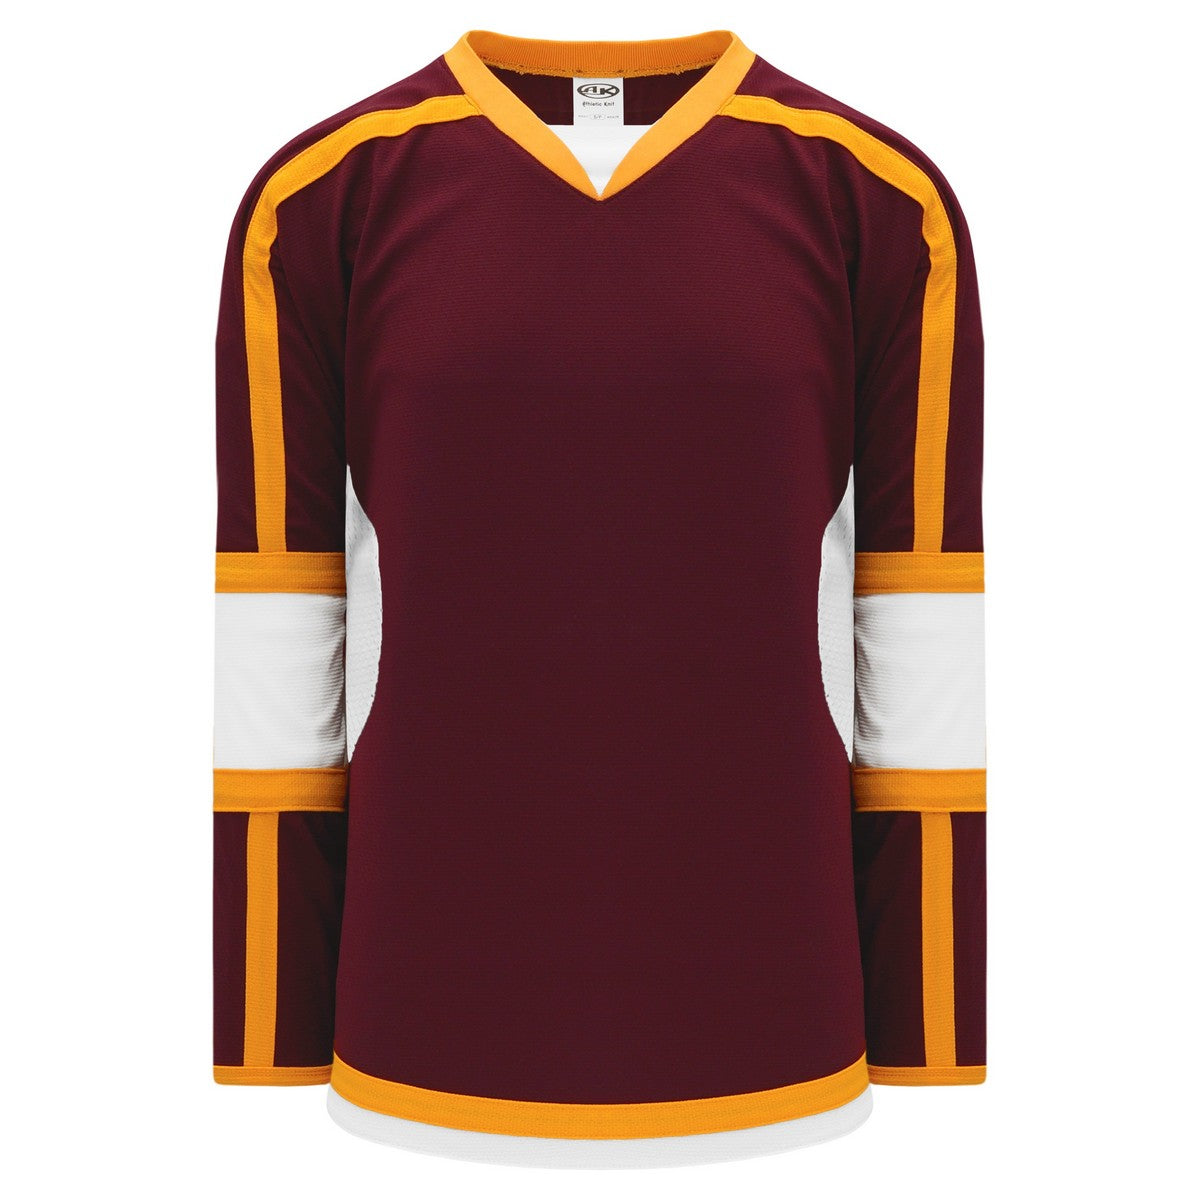 Select Series H7000 Jersey Maroon-Gold